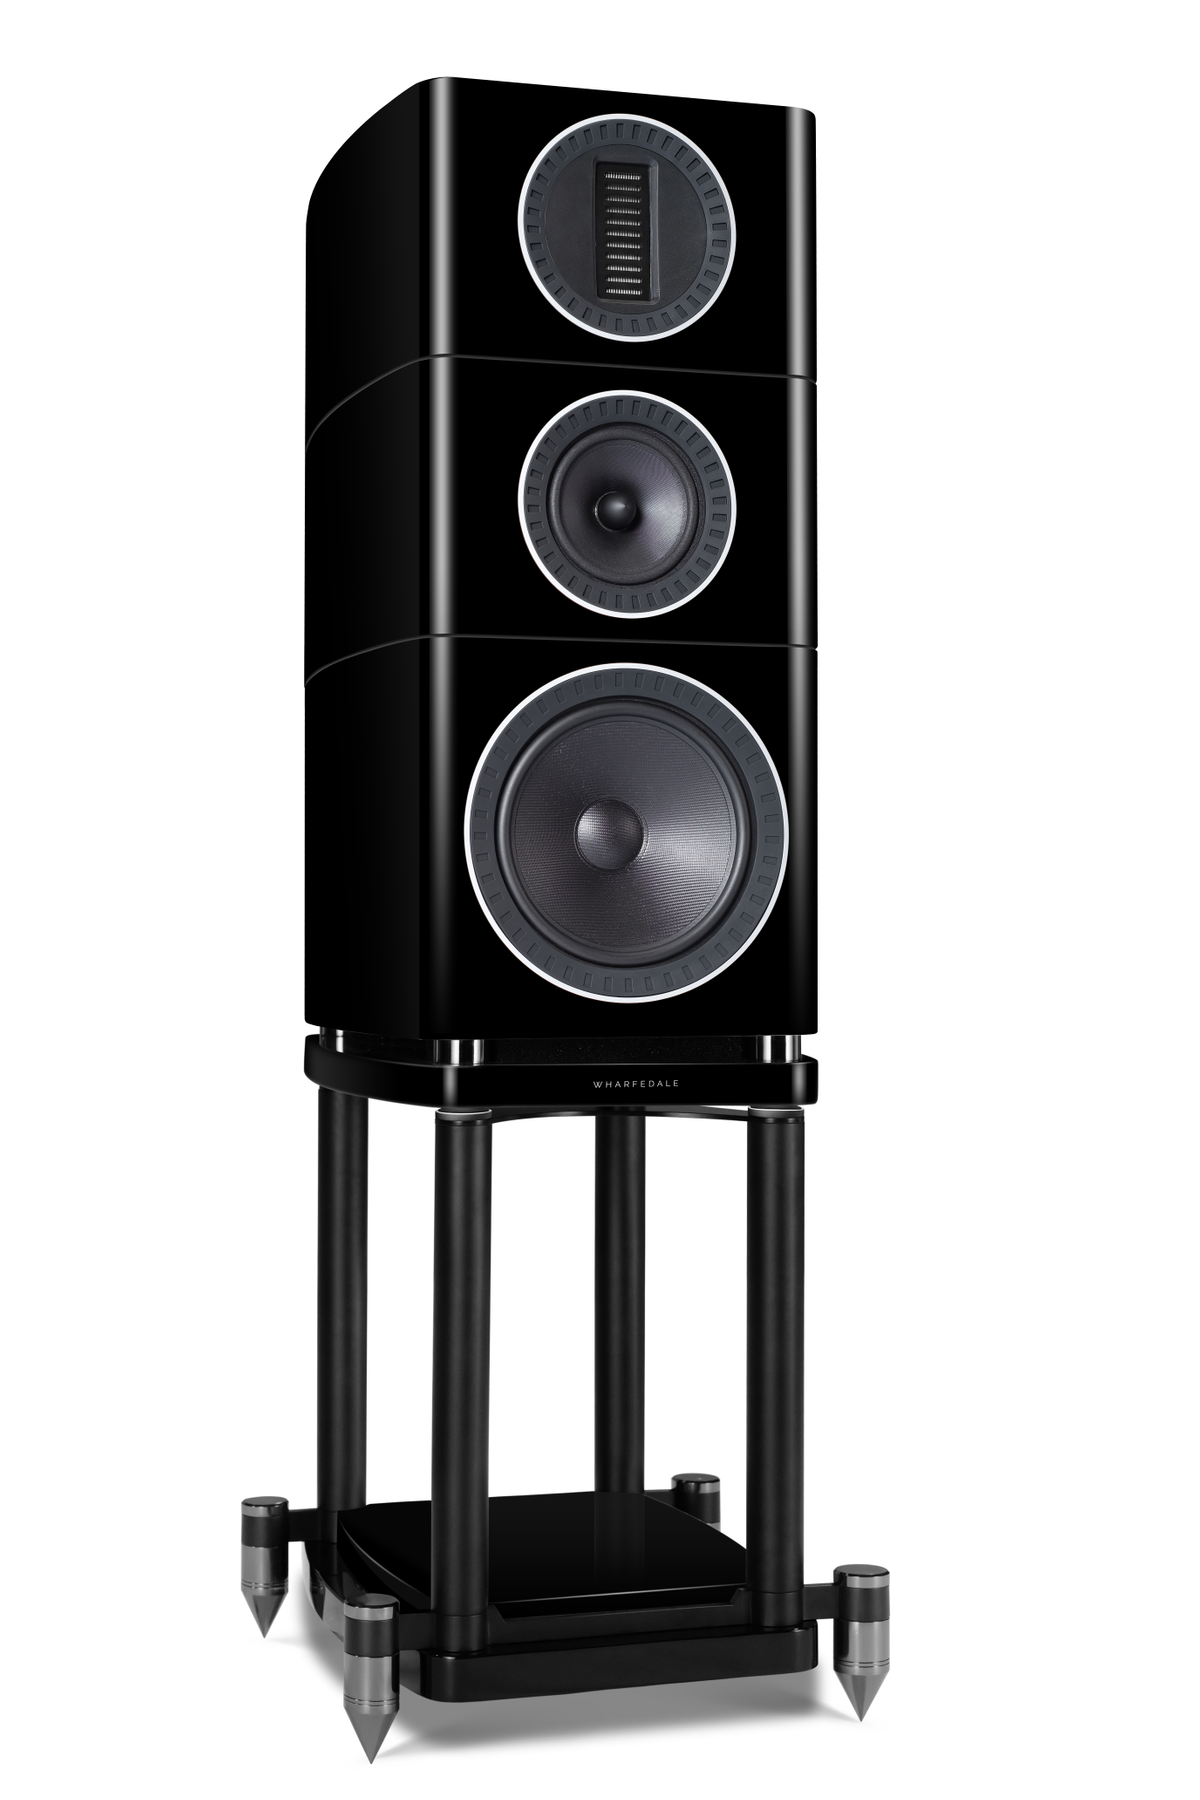 This elegant speaker stand is custom-designed to place a Wharfedale Elysian 2 speaker at the ideal listening height. Outrigger feet with carpet spikes provide added stability to help your speaker sound its best.